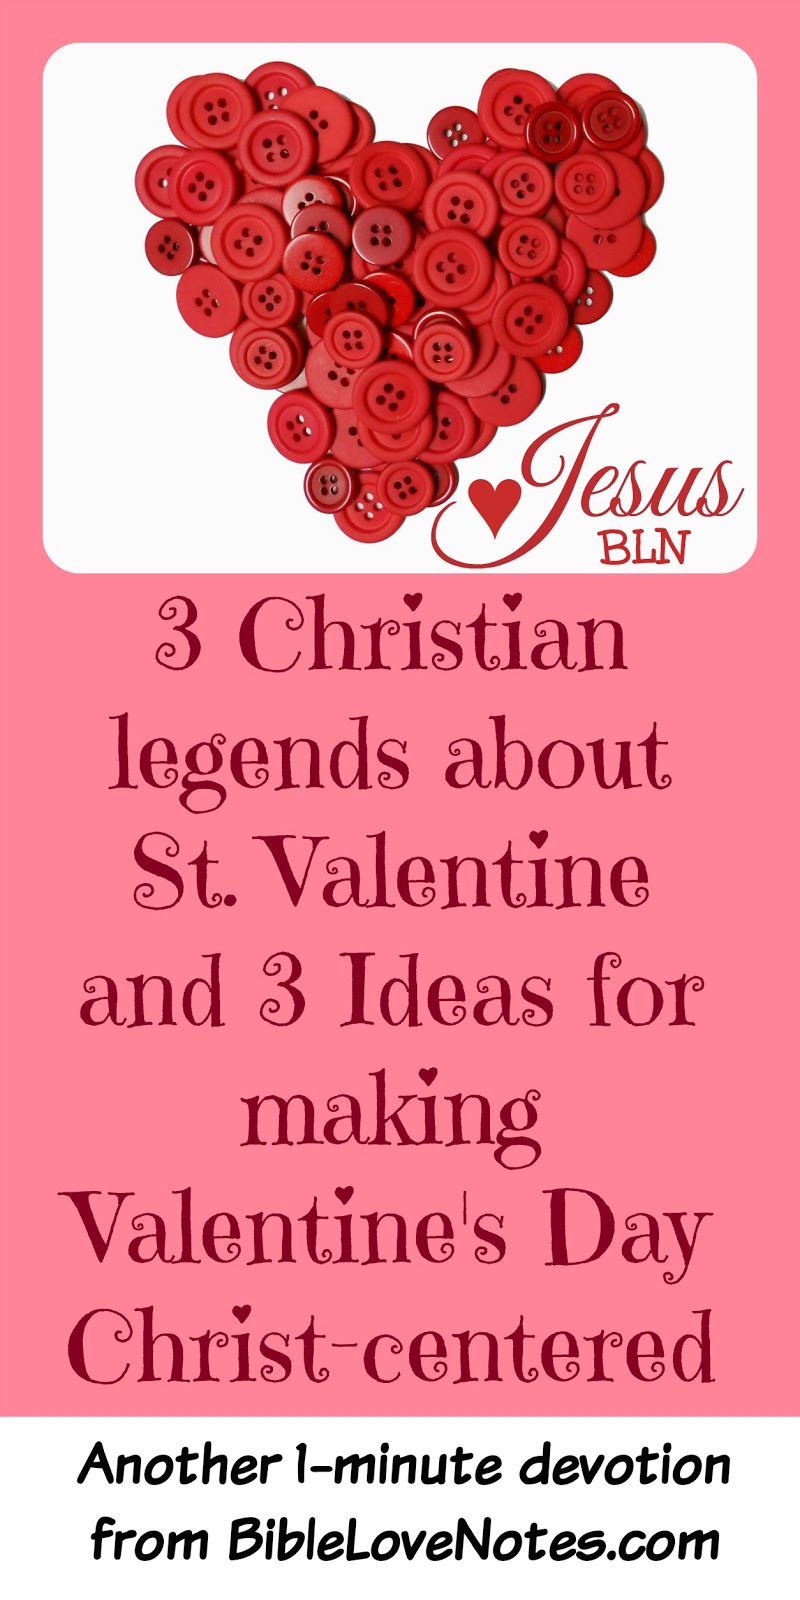 1Minute Bible Love Notes Origin of Valentine's Day